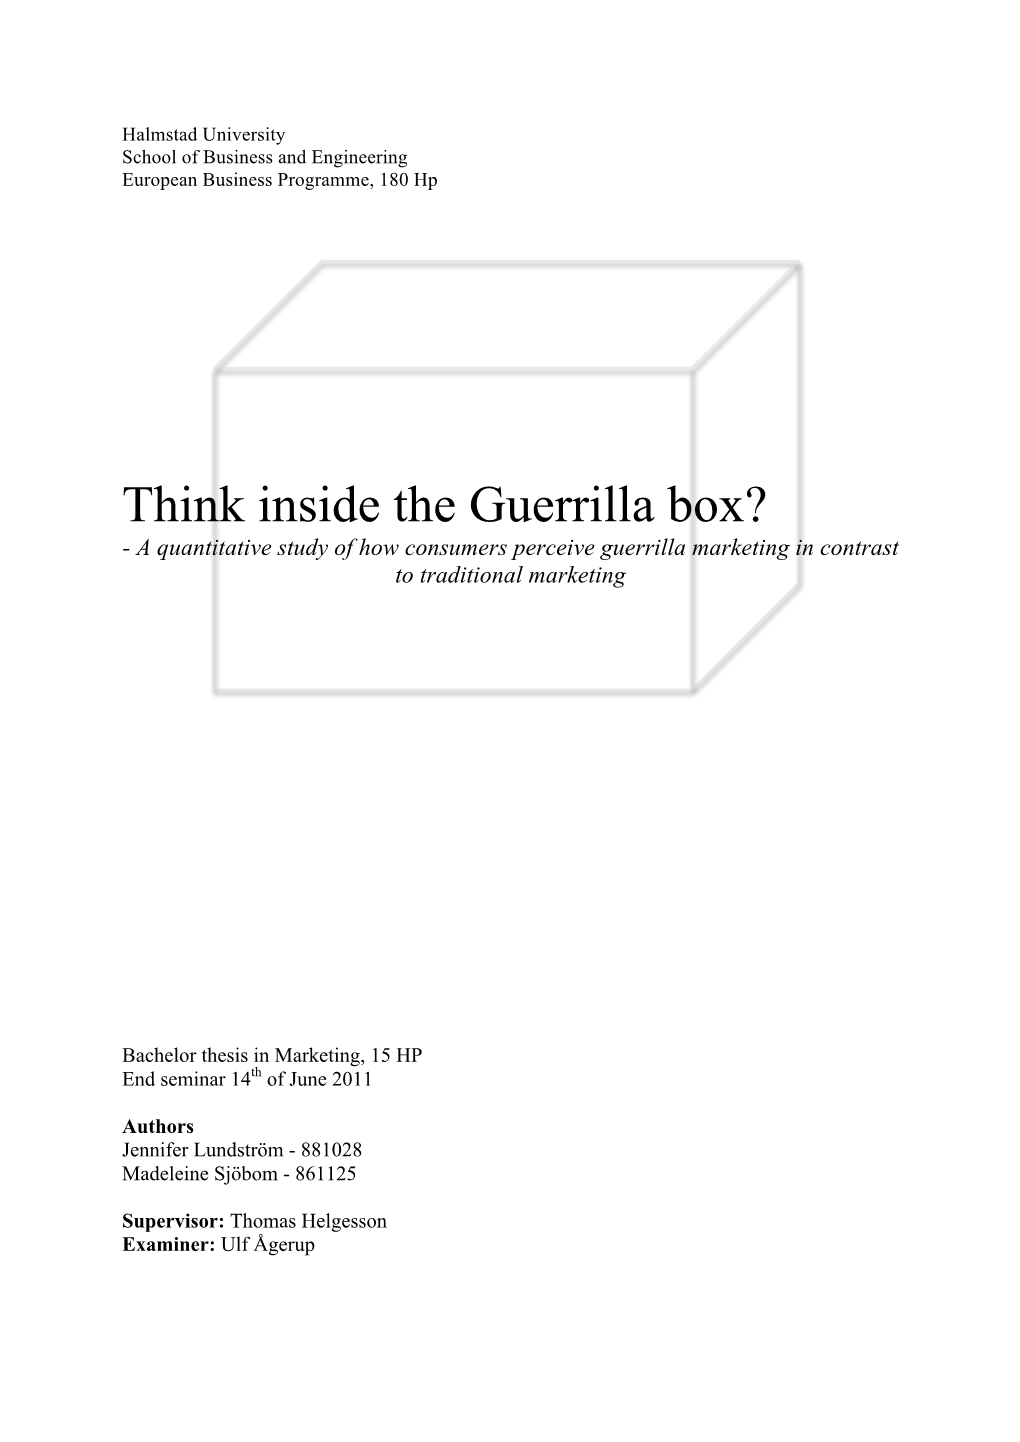 Think Inside the Guerrilla Box? - a Quantitative Study of How Consumers Perceive Guerrilla Marketing in Contrast to Traditional Marketing